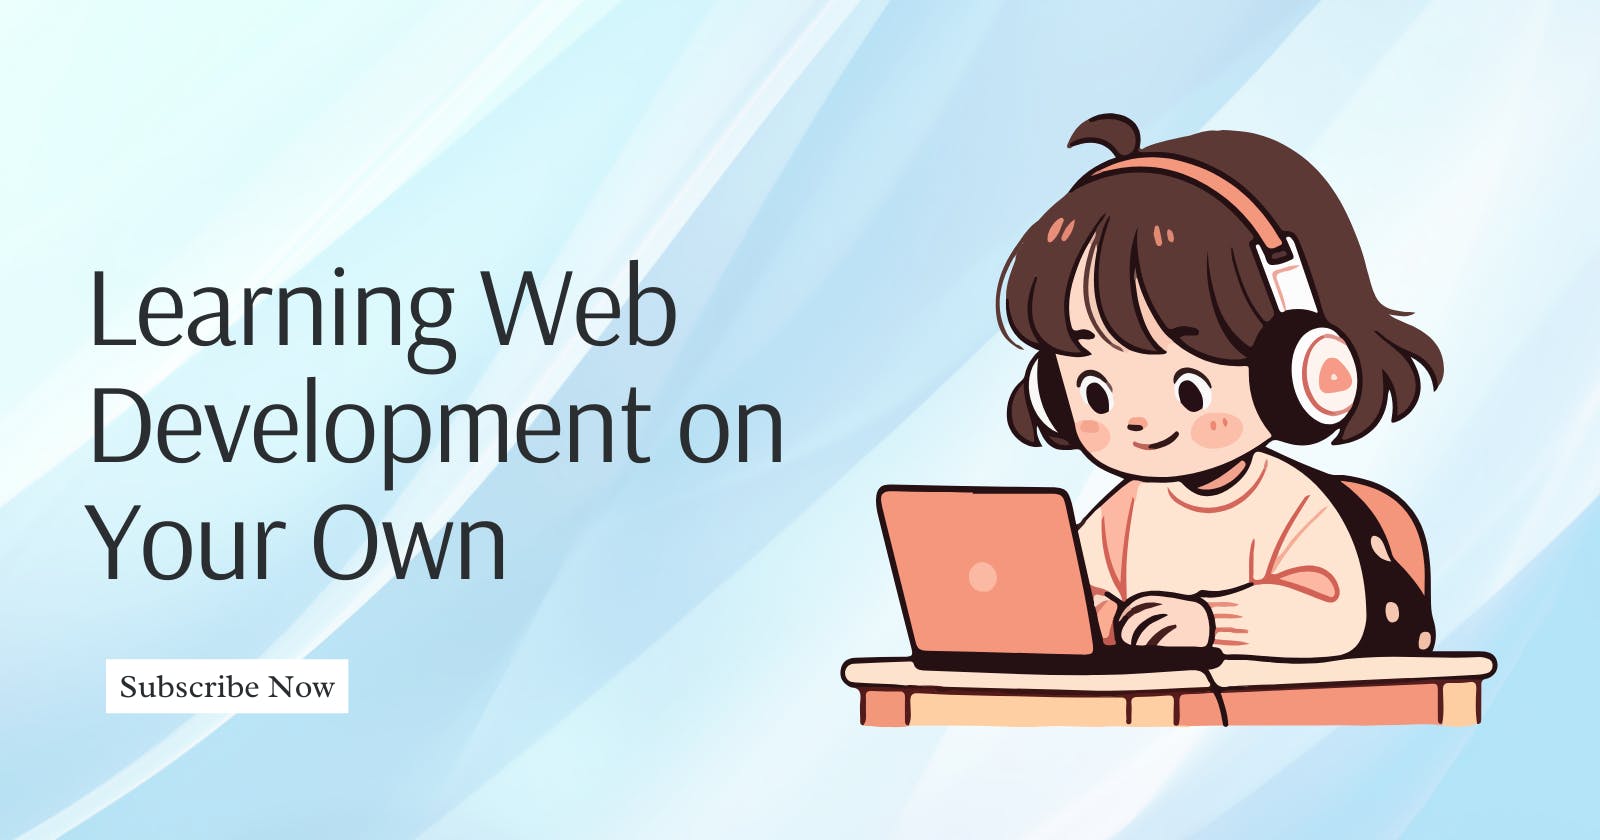 5 Tips for Learning Web Development on Your Own